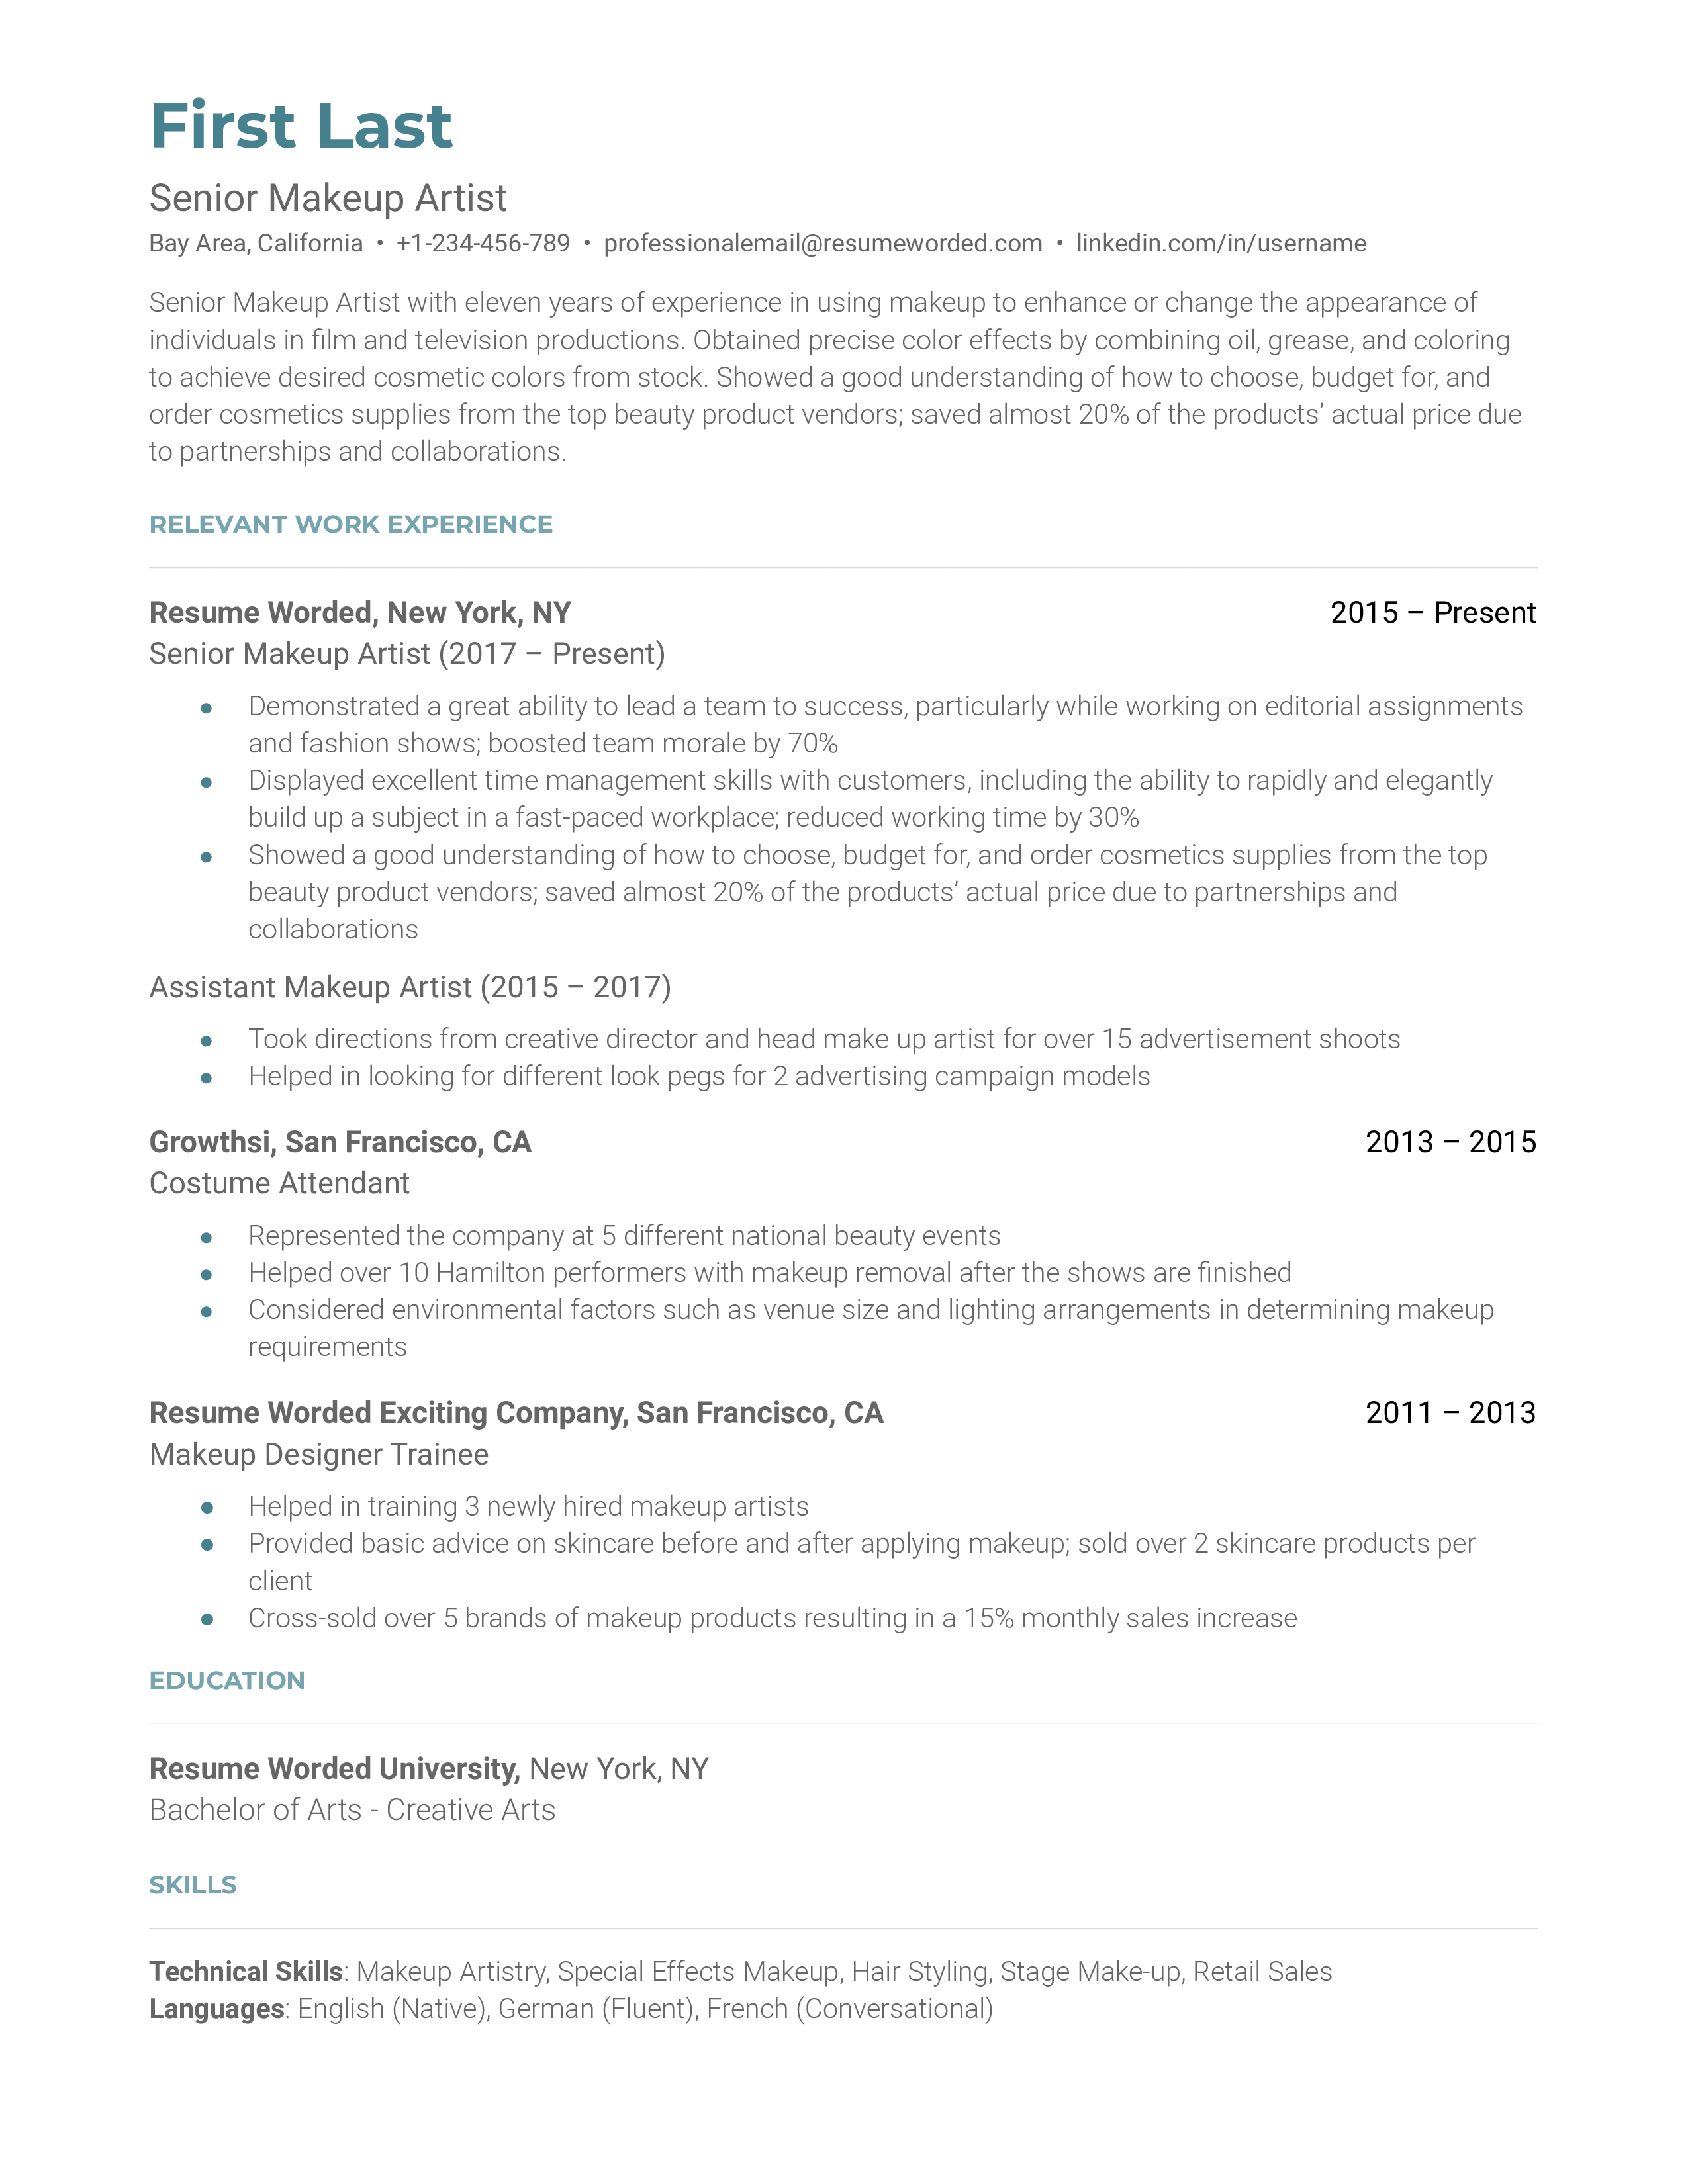 Senior makeup artist resume sample that highlights their budgeting prowess and their career pregression